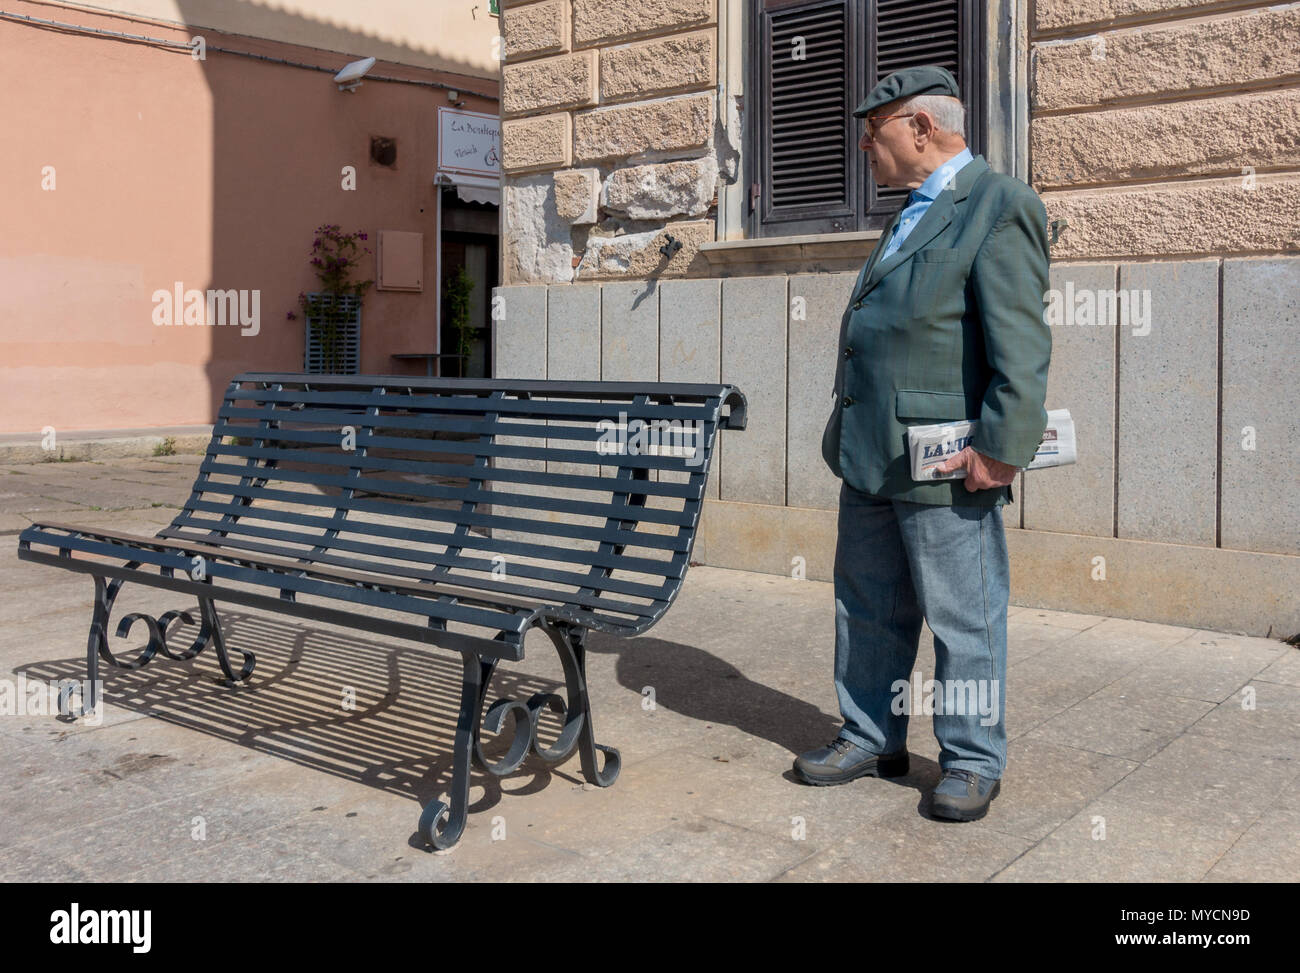 Senior Sardinian man  holding Italian newspaper with hearing aid and flat cap standing by a bench Stock Photo